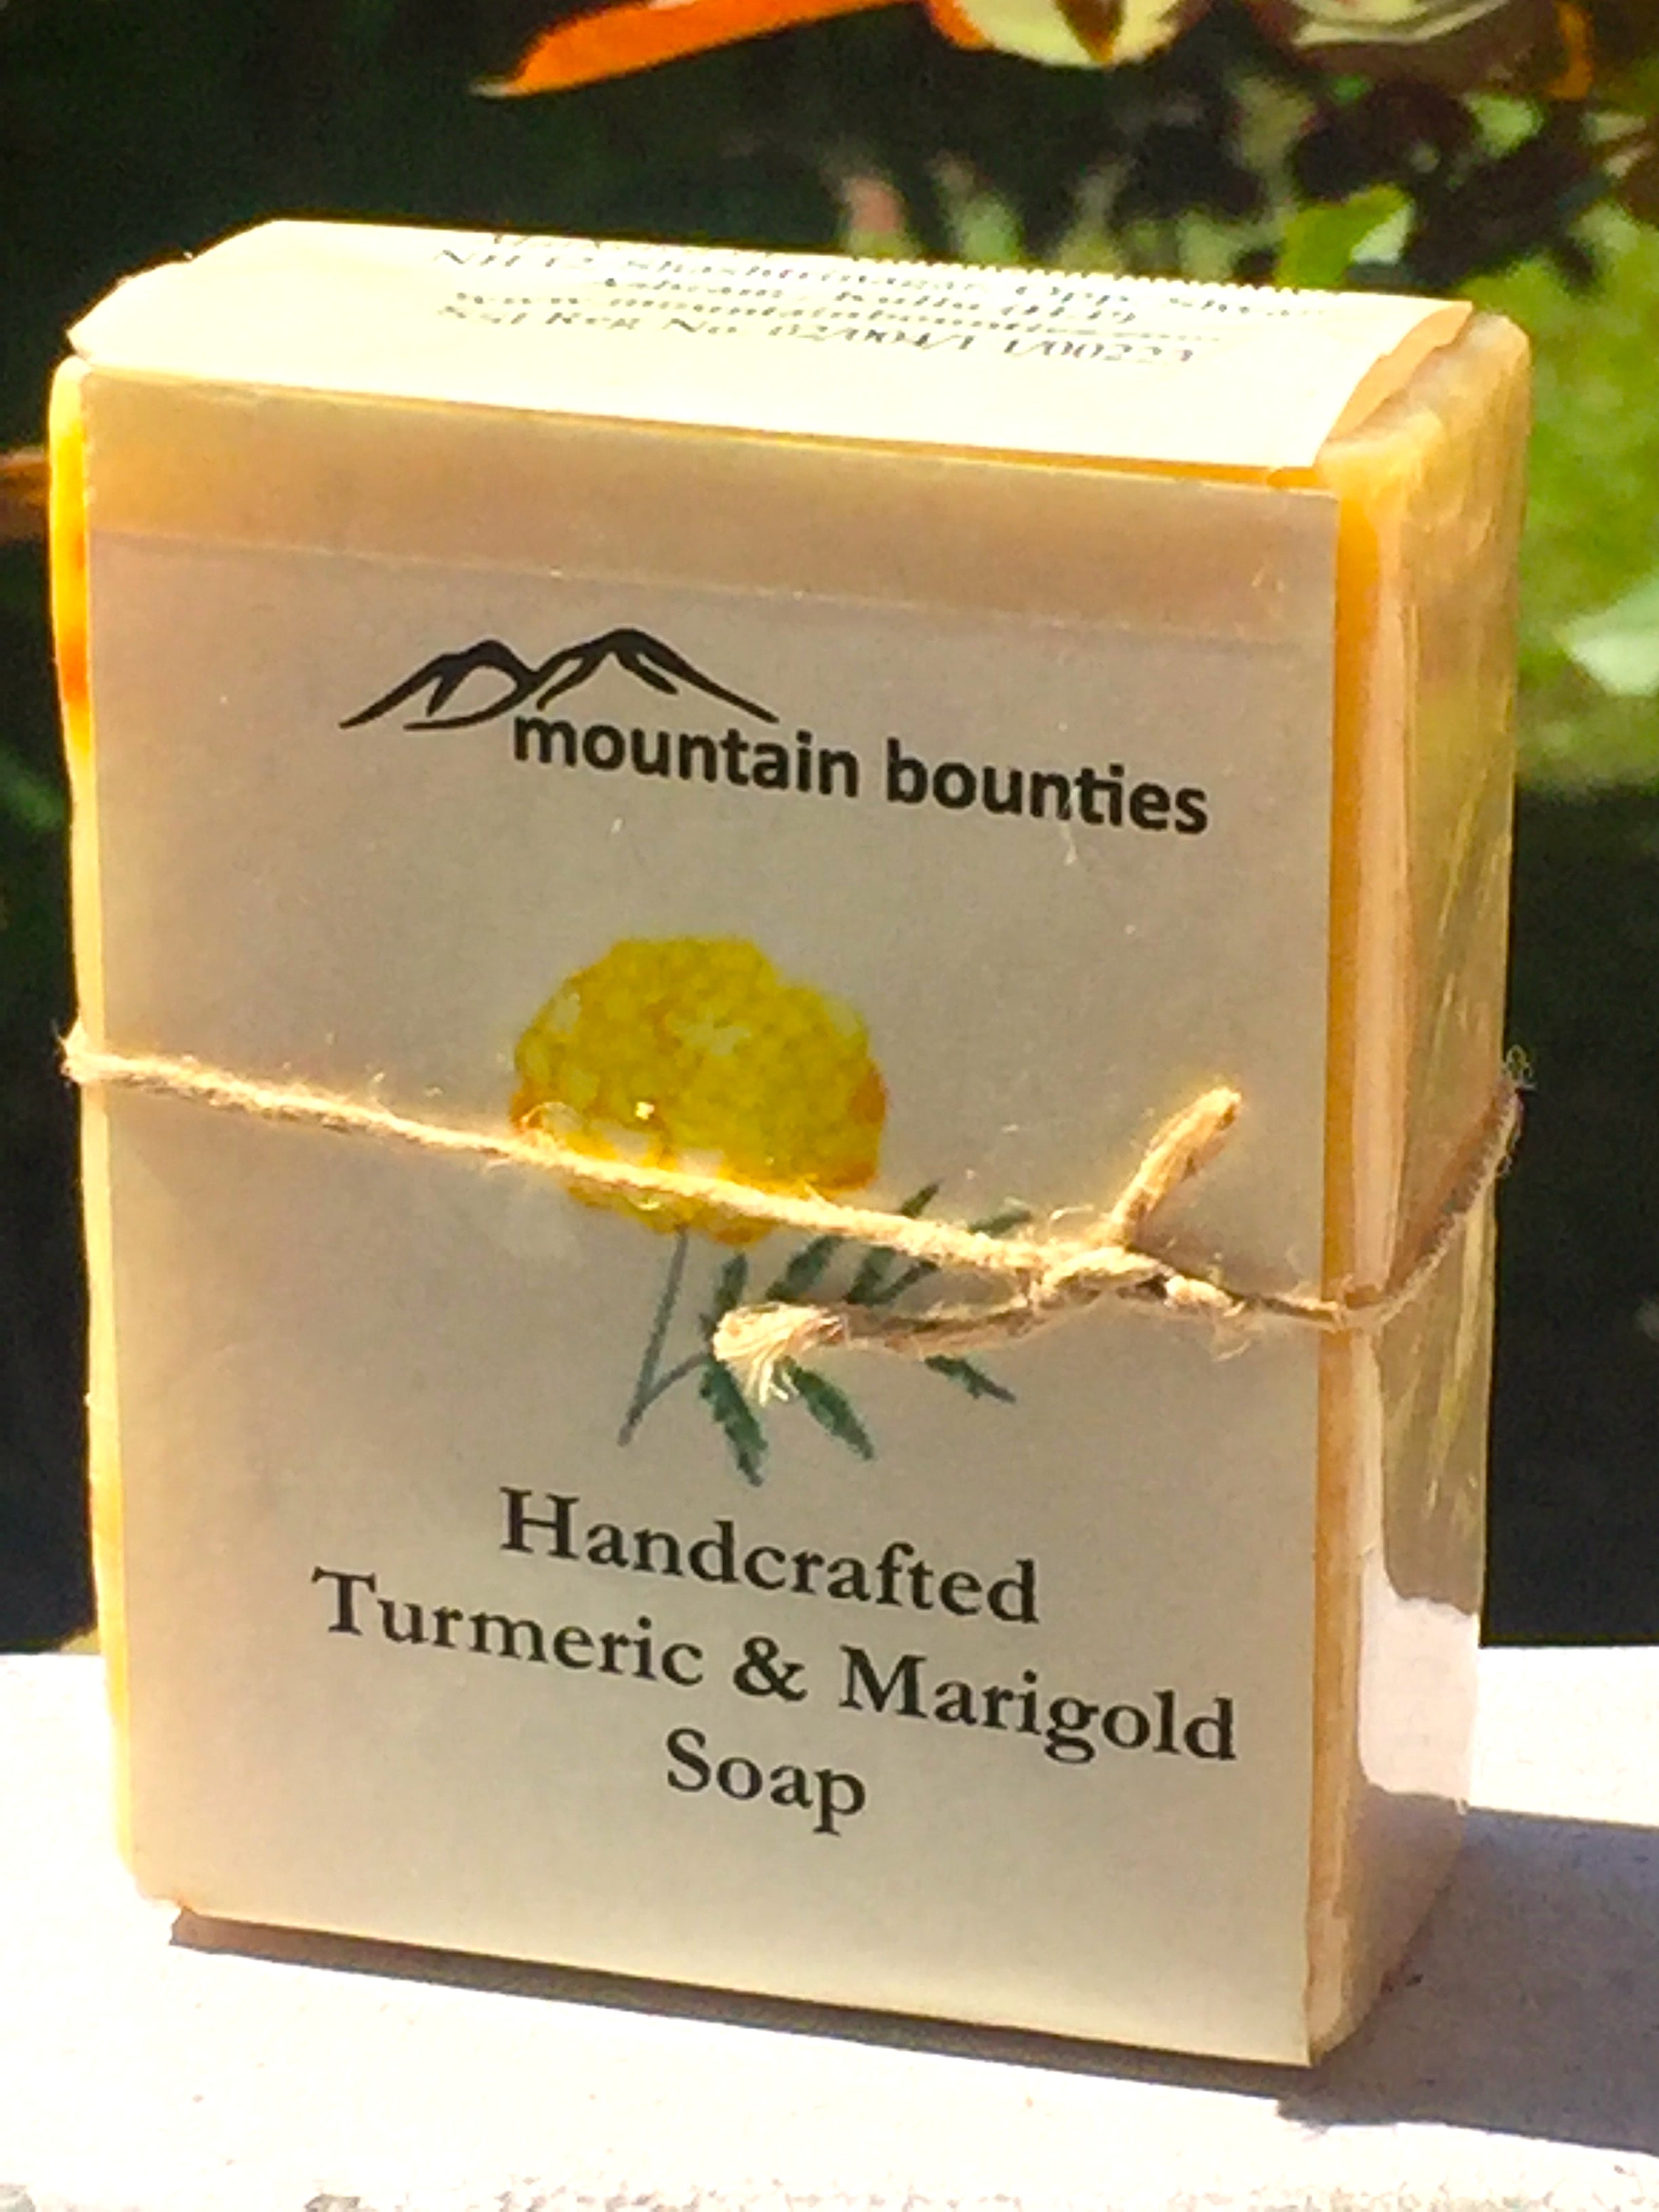 Turmeric & Marigold Soap, handmade cold pressed, 100% natural, 100% Handmade, Cold Pressed, herbal soap, cold pressed, Handmade, 100% Natural, Moisturising for face, hands and hair, Recommended for prematurely aged skin, sensitive, inflamed and dry skin. Cold pressed, 100% natural, handmade, Natural Skin Care, Natural oils, Skin Care, Himachal Oils, Himalayan Salt, Mountain Bounties, Himalayan people Care